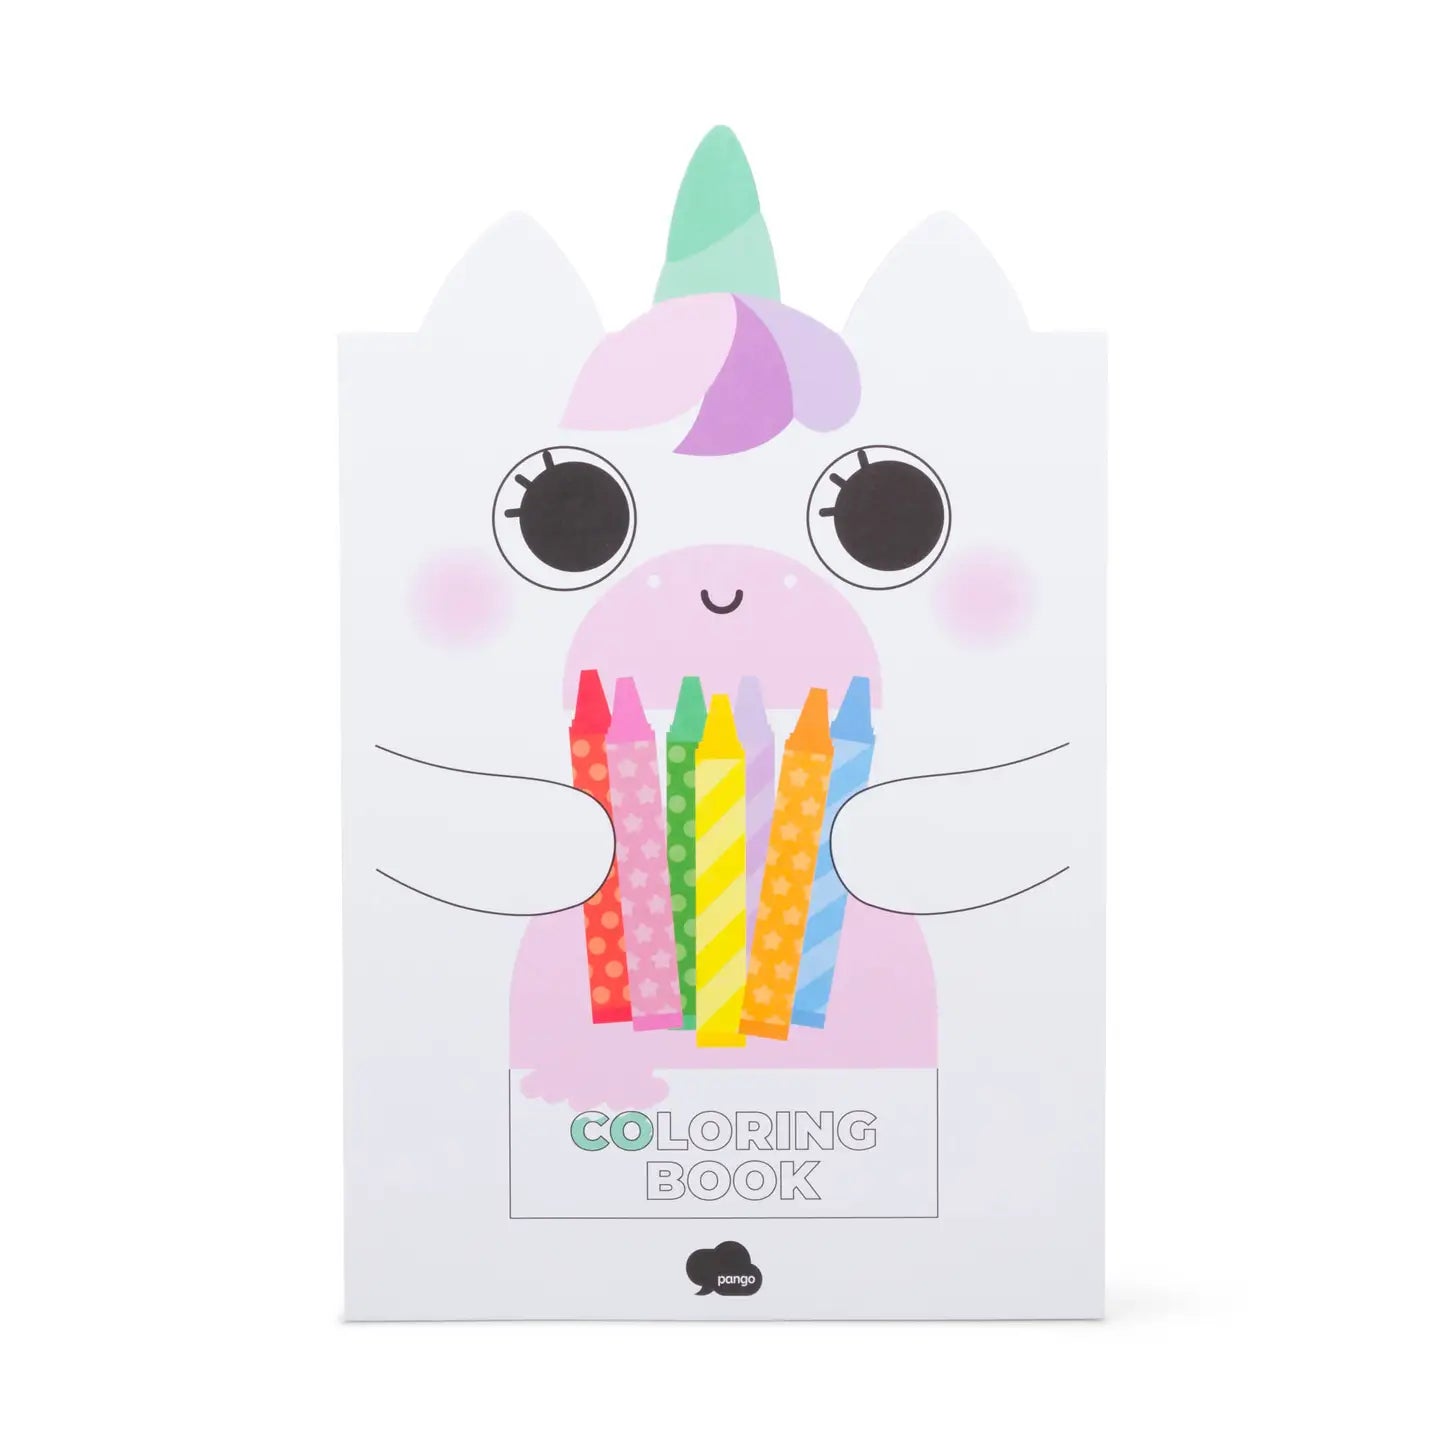 Unicorn stationery/card collection